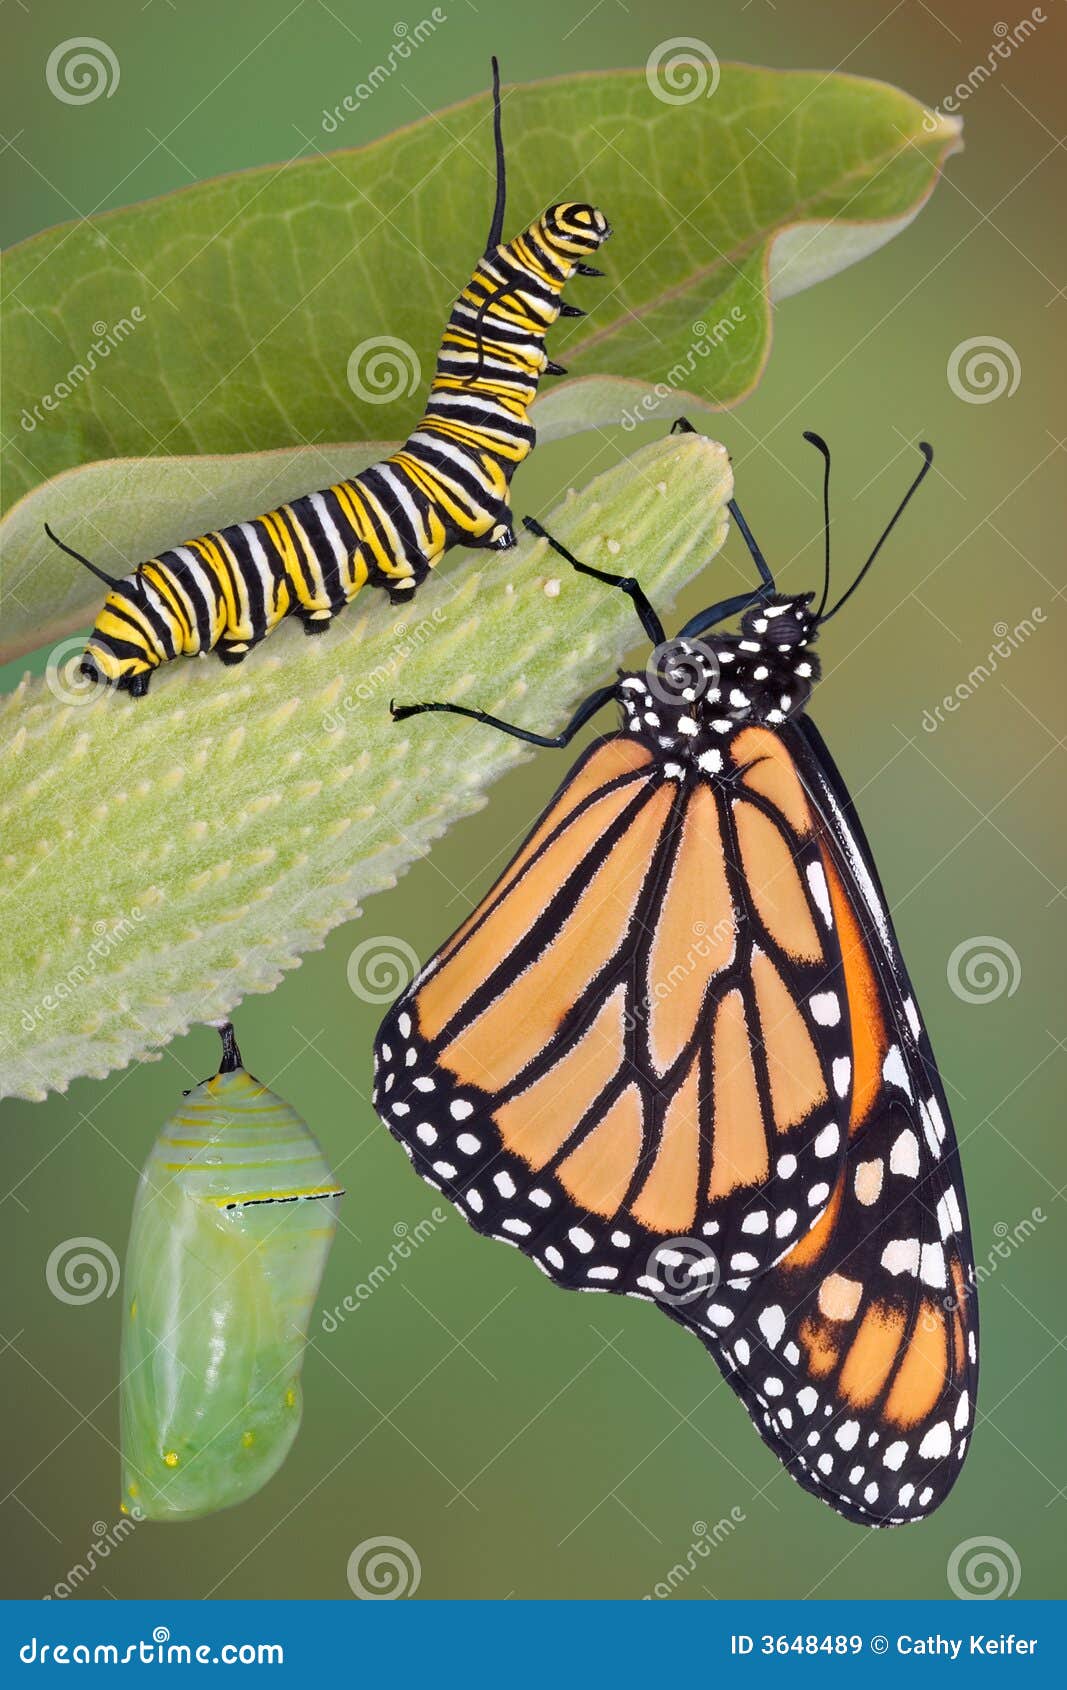 monarch life stages